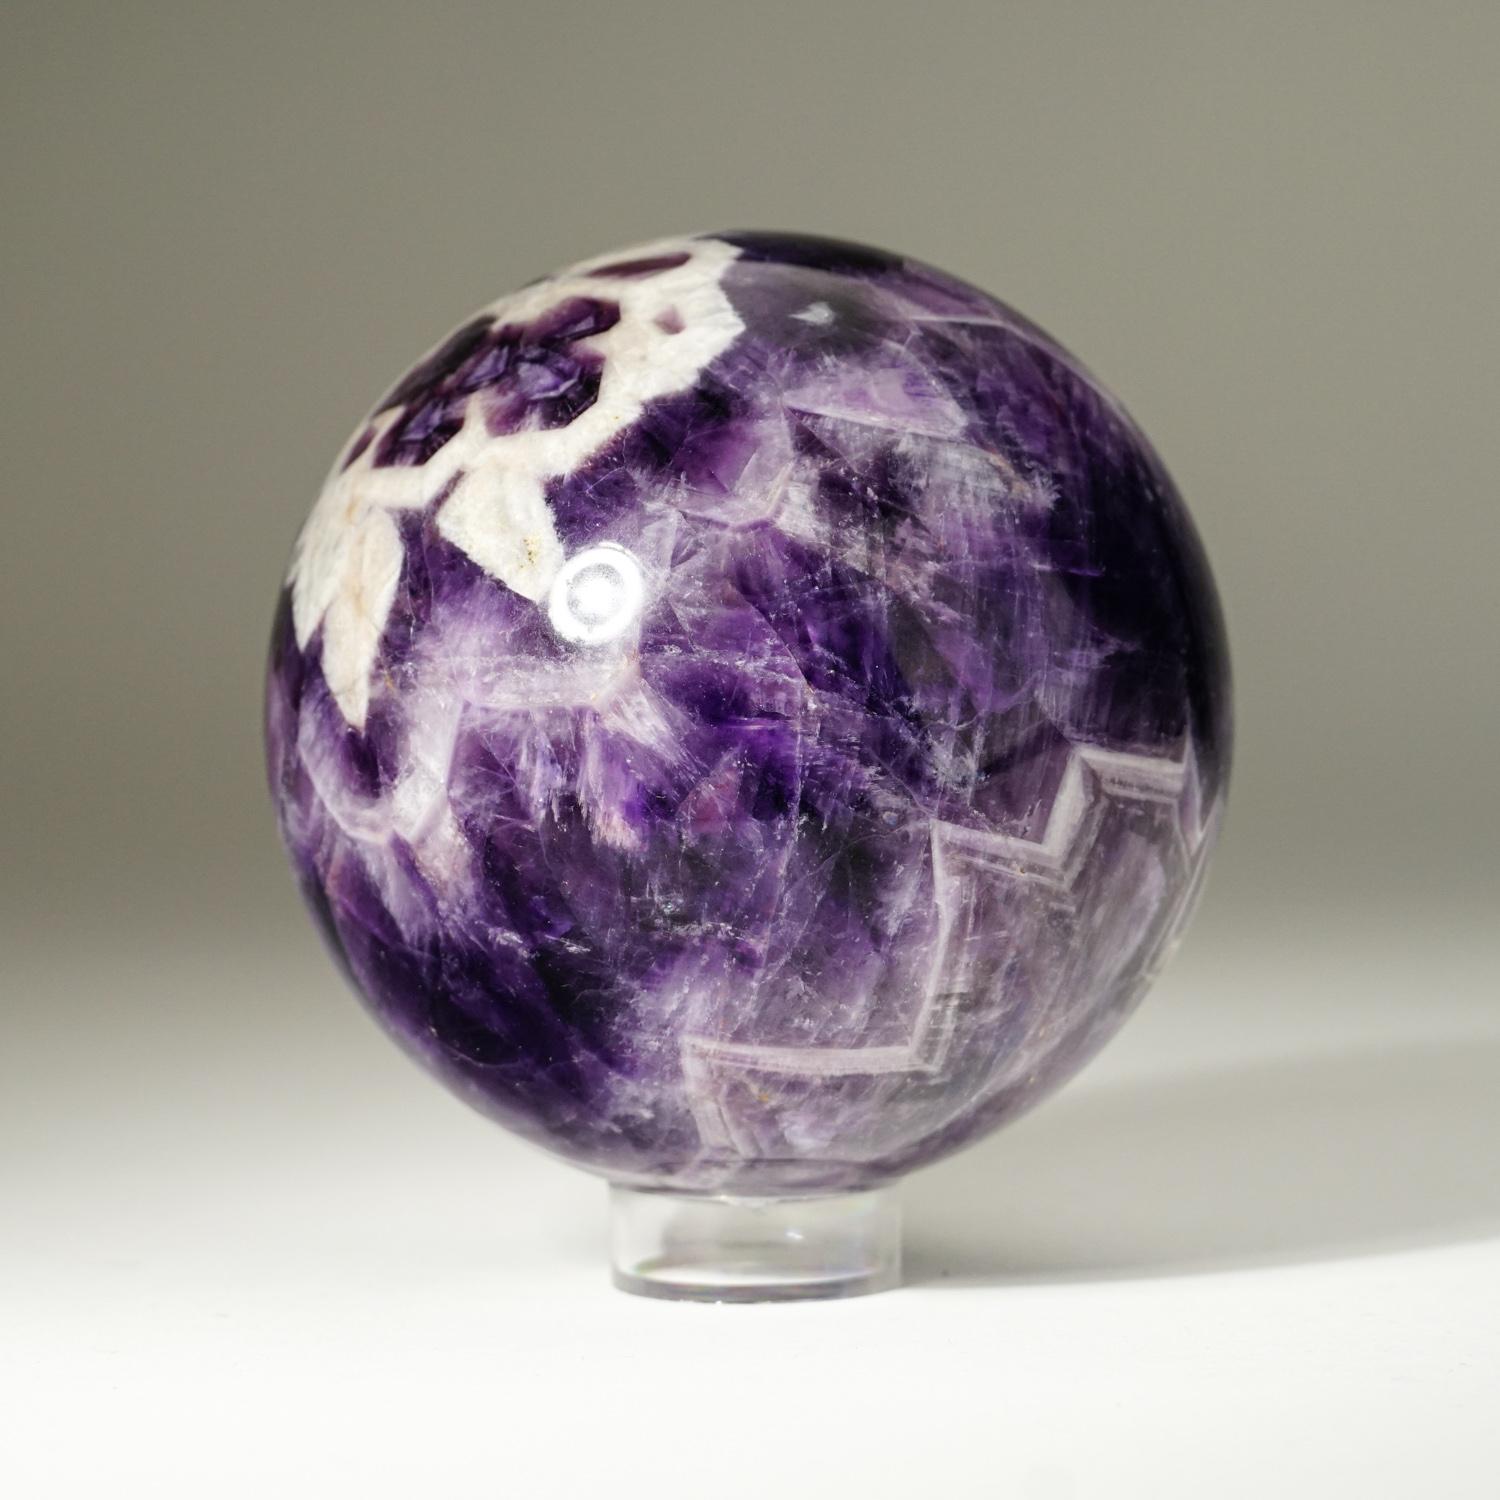 Top quality polished chevron amethyst sphere with vivid purple color and translucent to transparent clarity.
Chevron Amethyst is a combination of Amethyst and White Quartz, mixed together in a V-striped or banded pattern. Chevron Amethyst combines